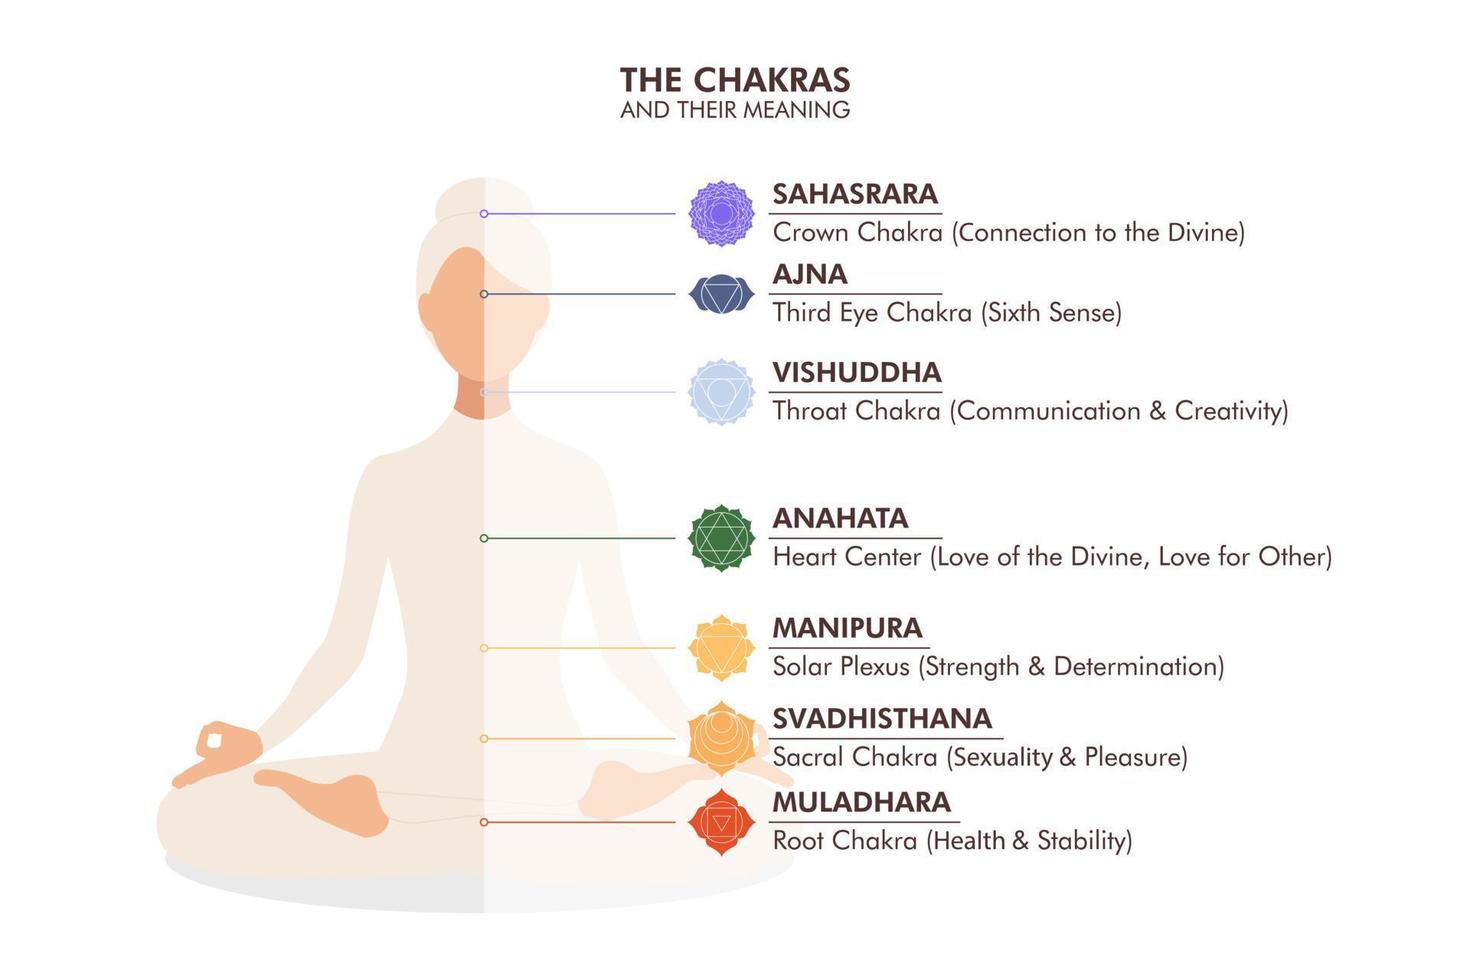 Infographic vector illustration with woman sitting in lotus pose, meditating. The image of the seven chakras, their names and meanings. Alternative medicine, energy practices poster